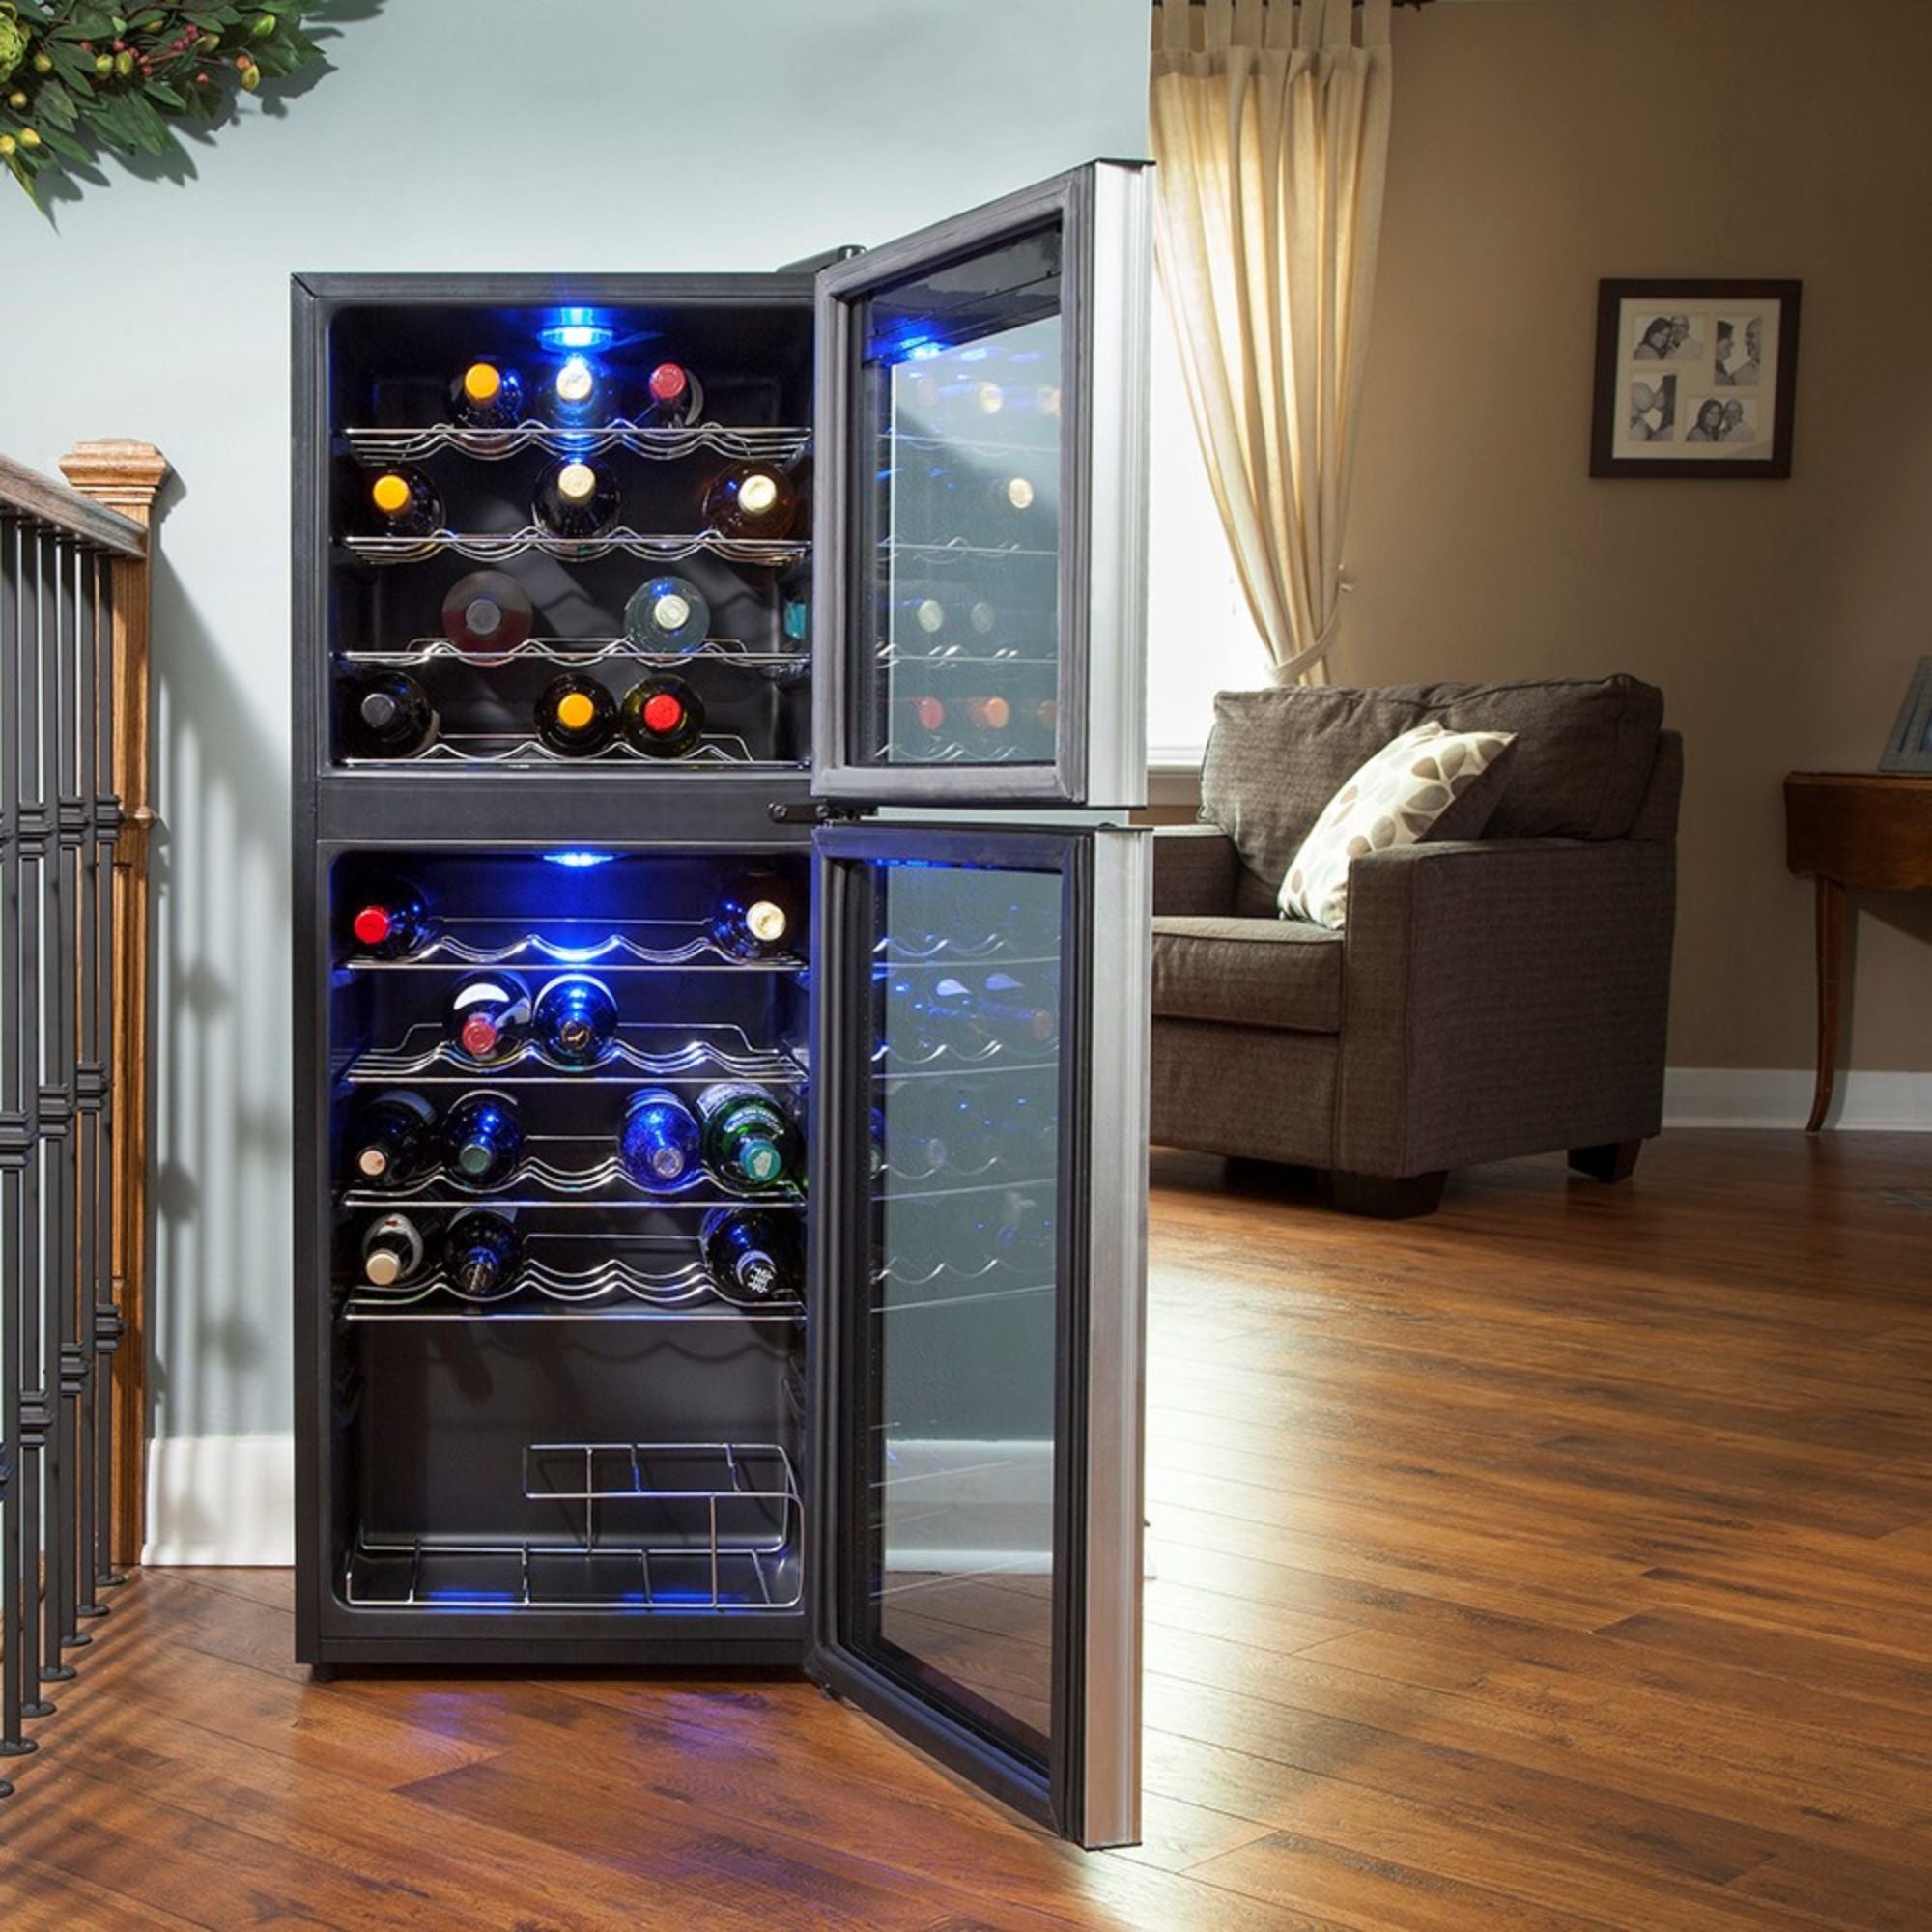 Koolatron 45 bottle dual zone freestanding wine fridge, open and filled with bottles of wine, set up on reddish-brown hardwood floor with a brown sofa in the background